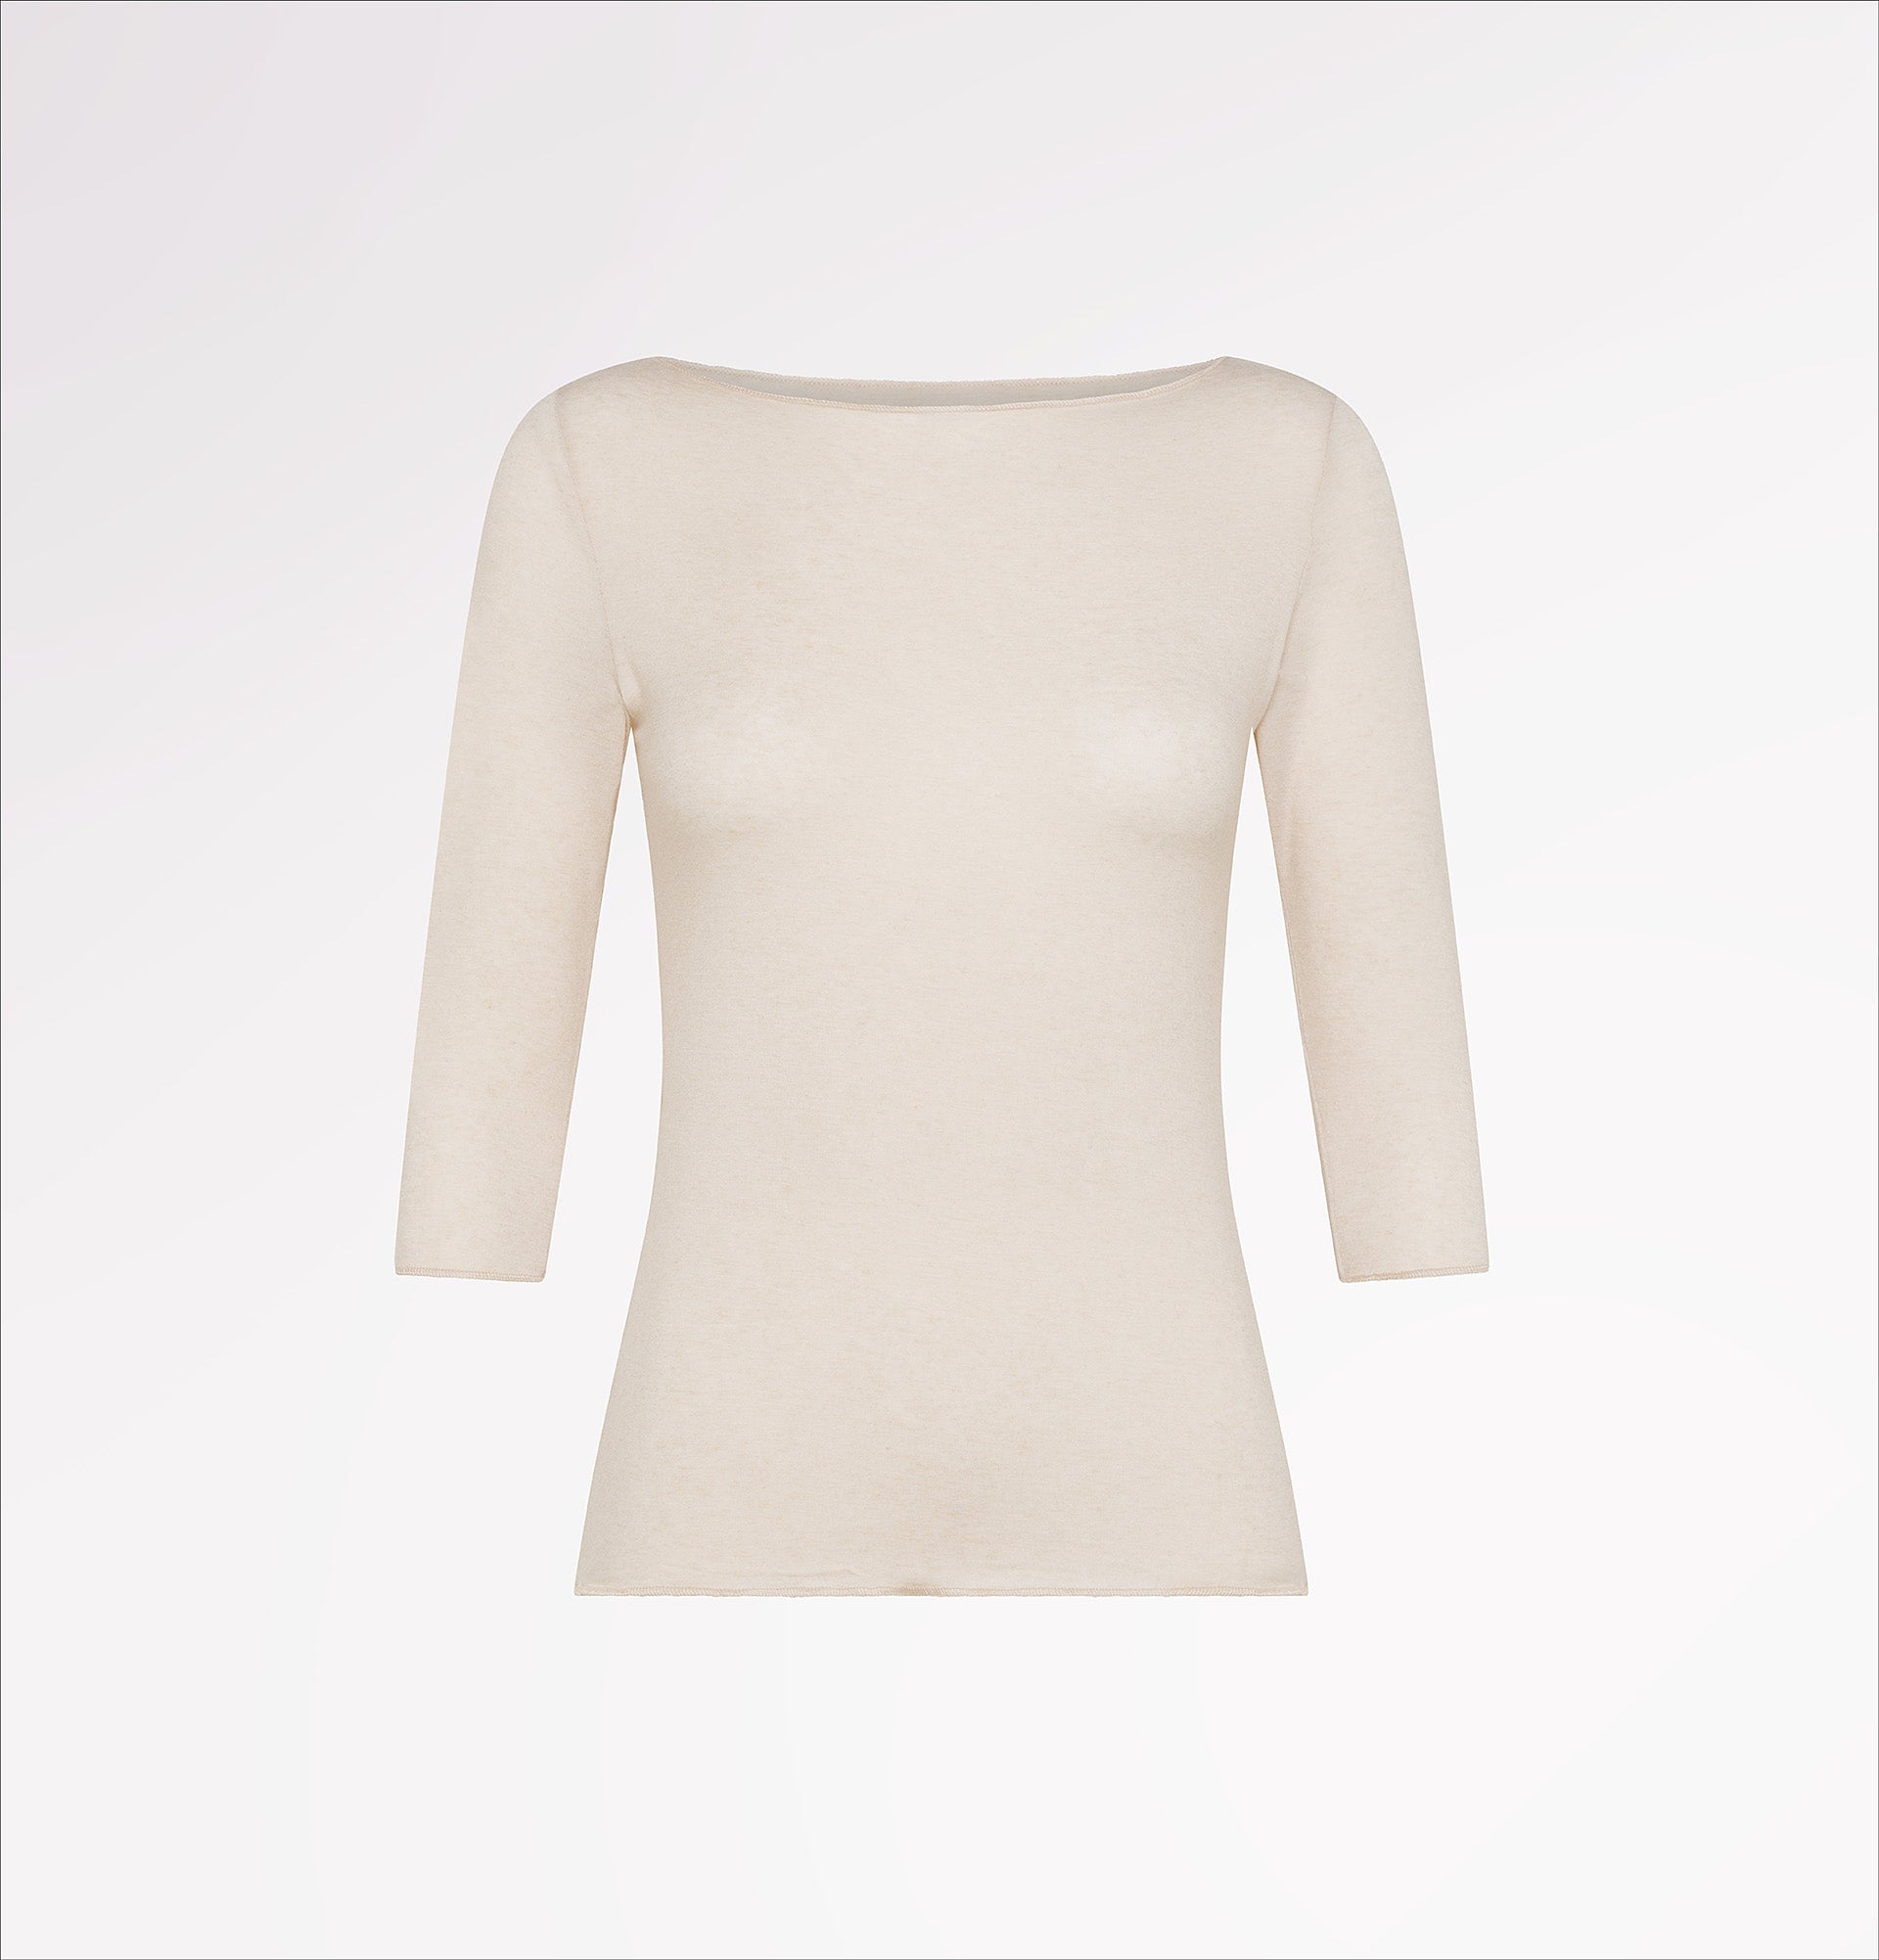 Boat-neck sweater in TENCEL™ cashmere with three-quarter sleeves